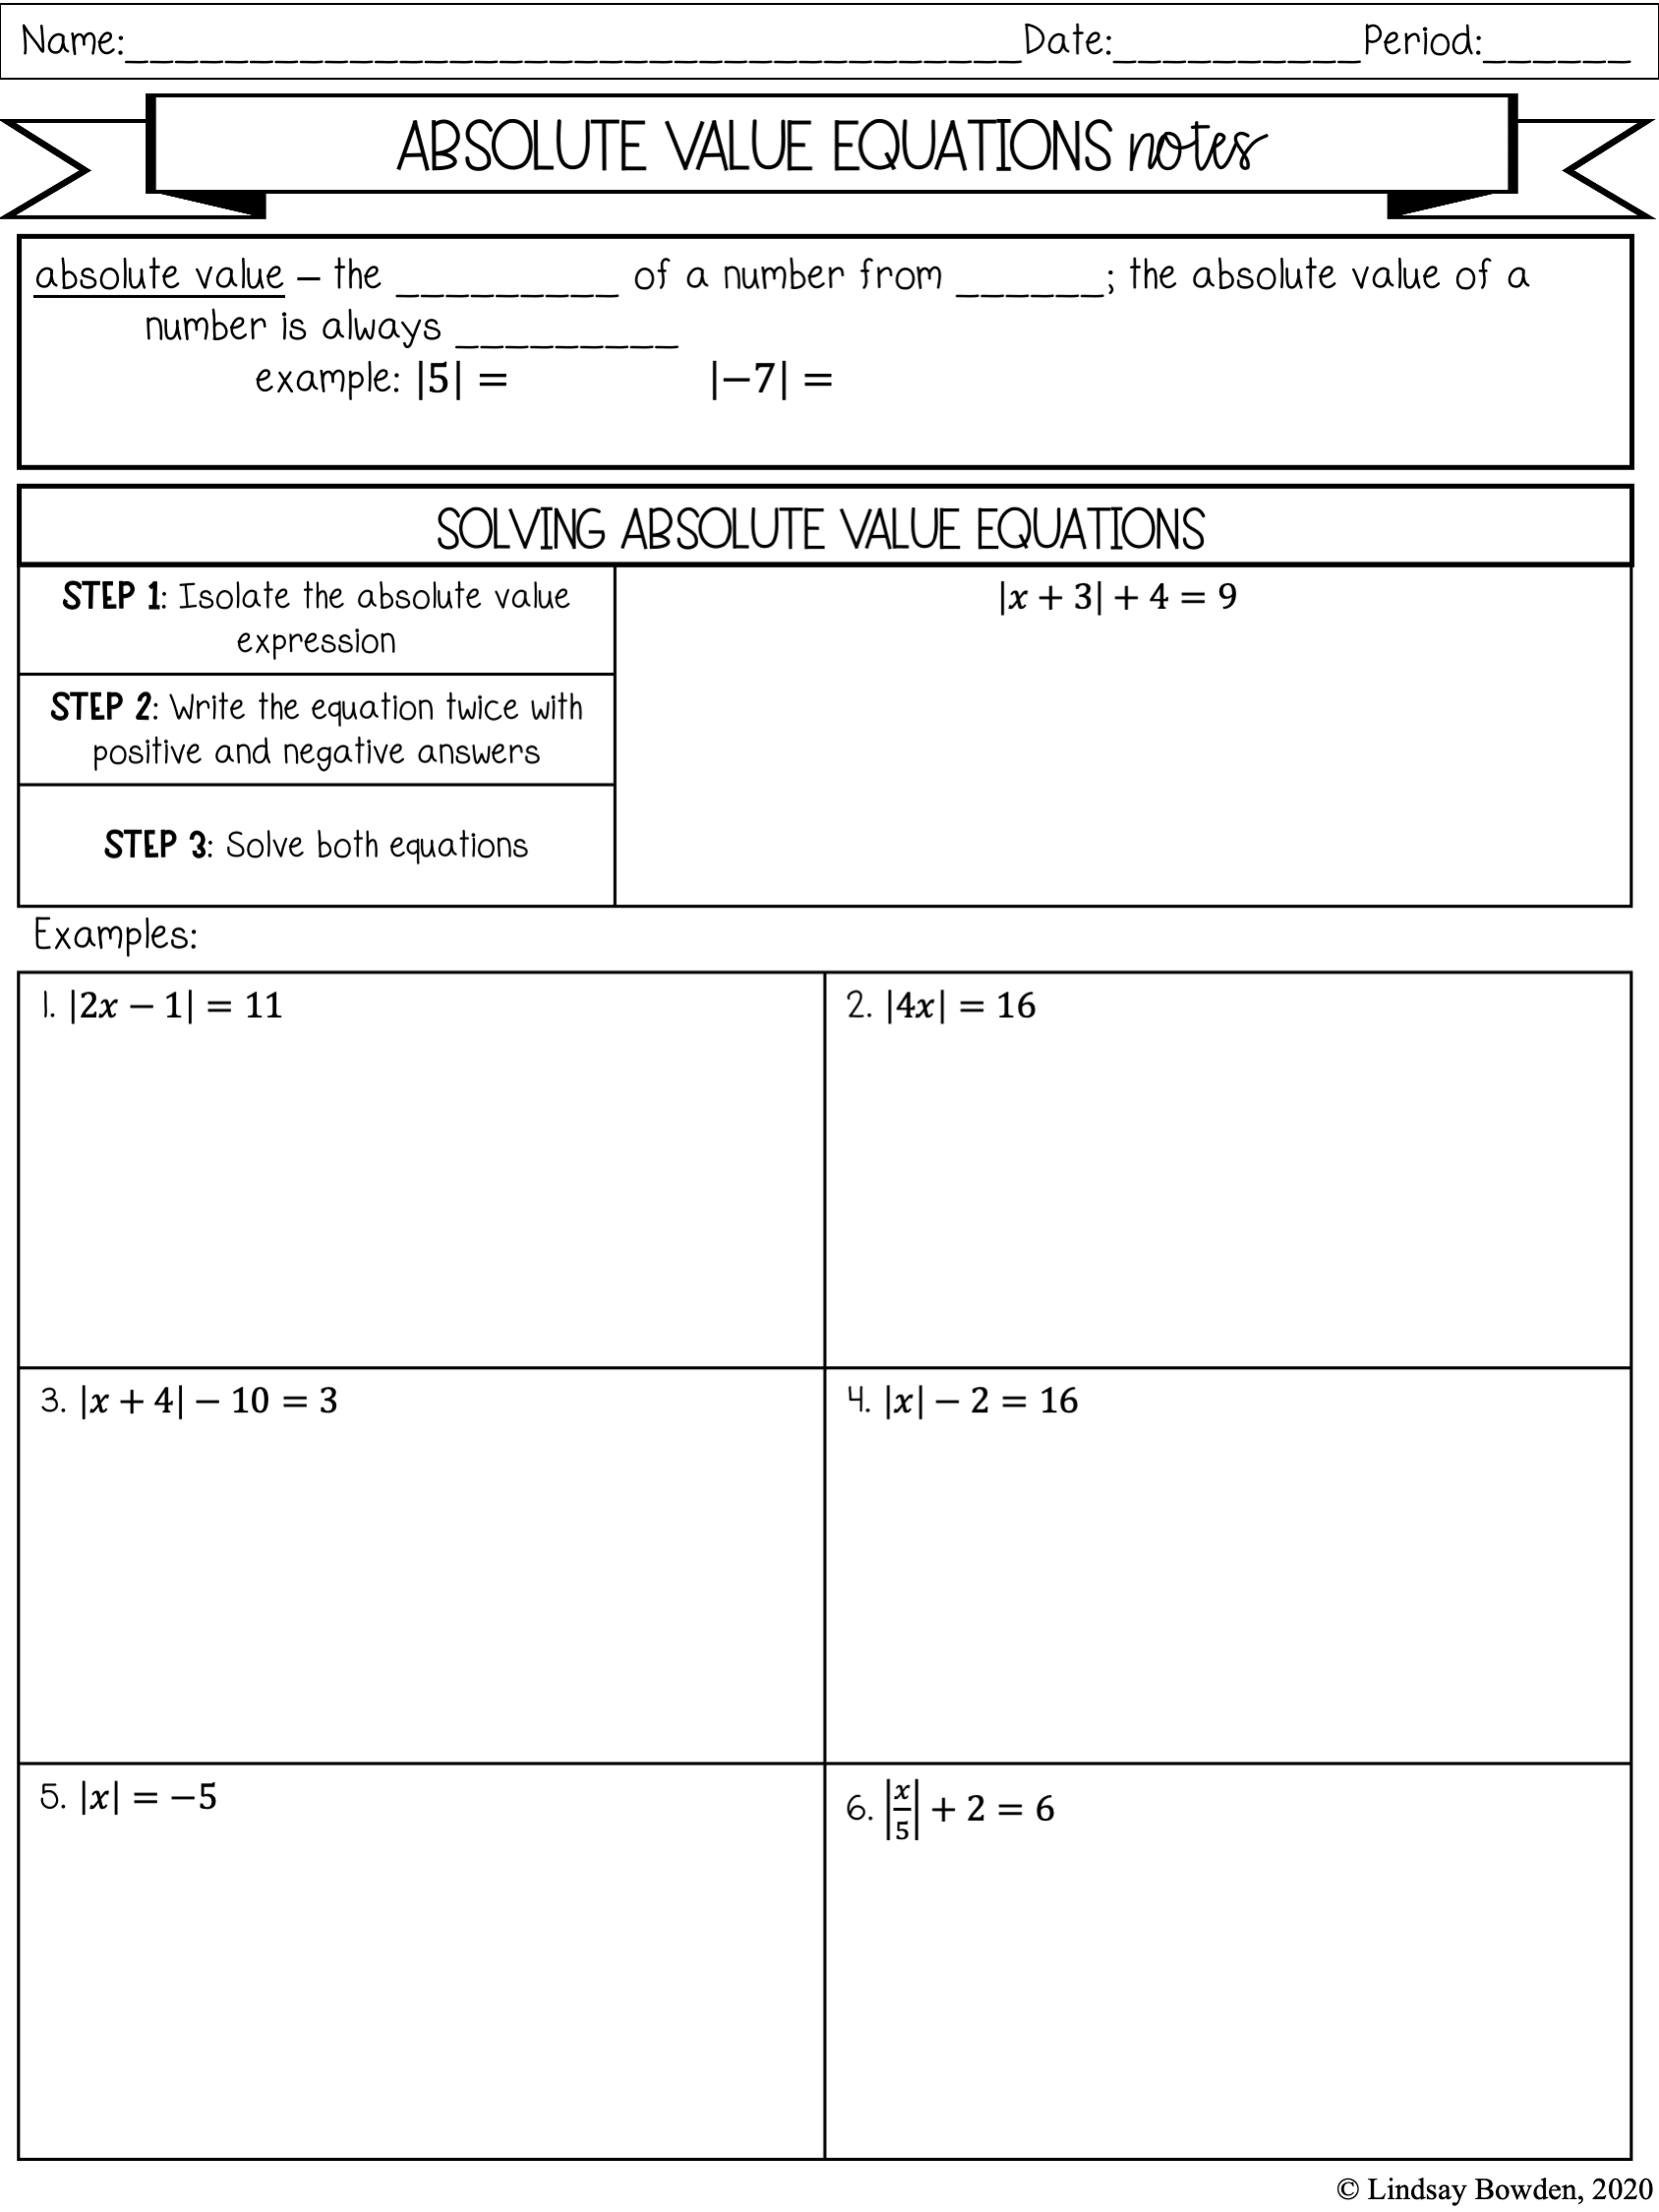 Absolute Value Notes and Worksheets - Lindsay Bowden Throughout Solving Absolute Value Inequalities Worksheet